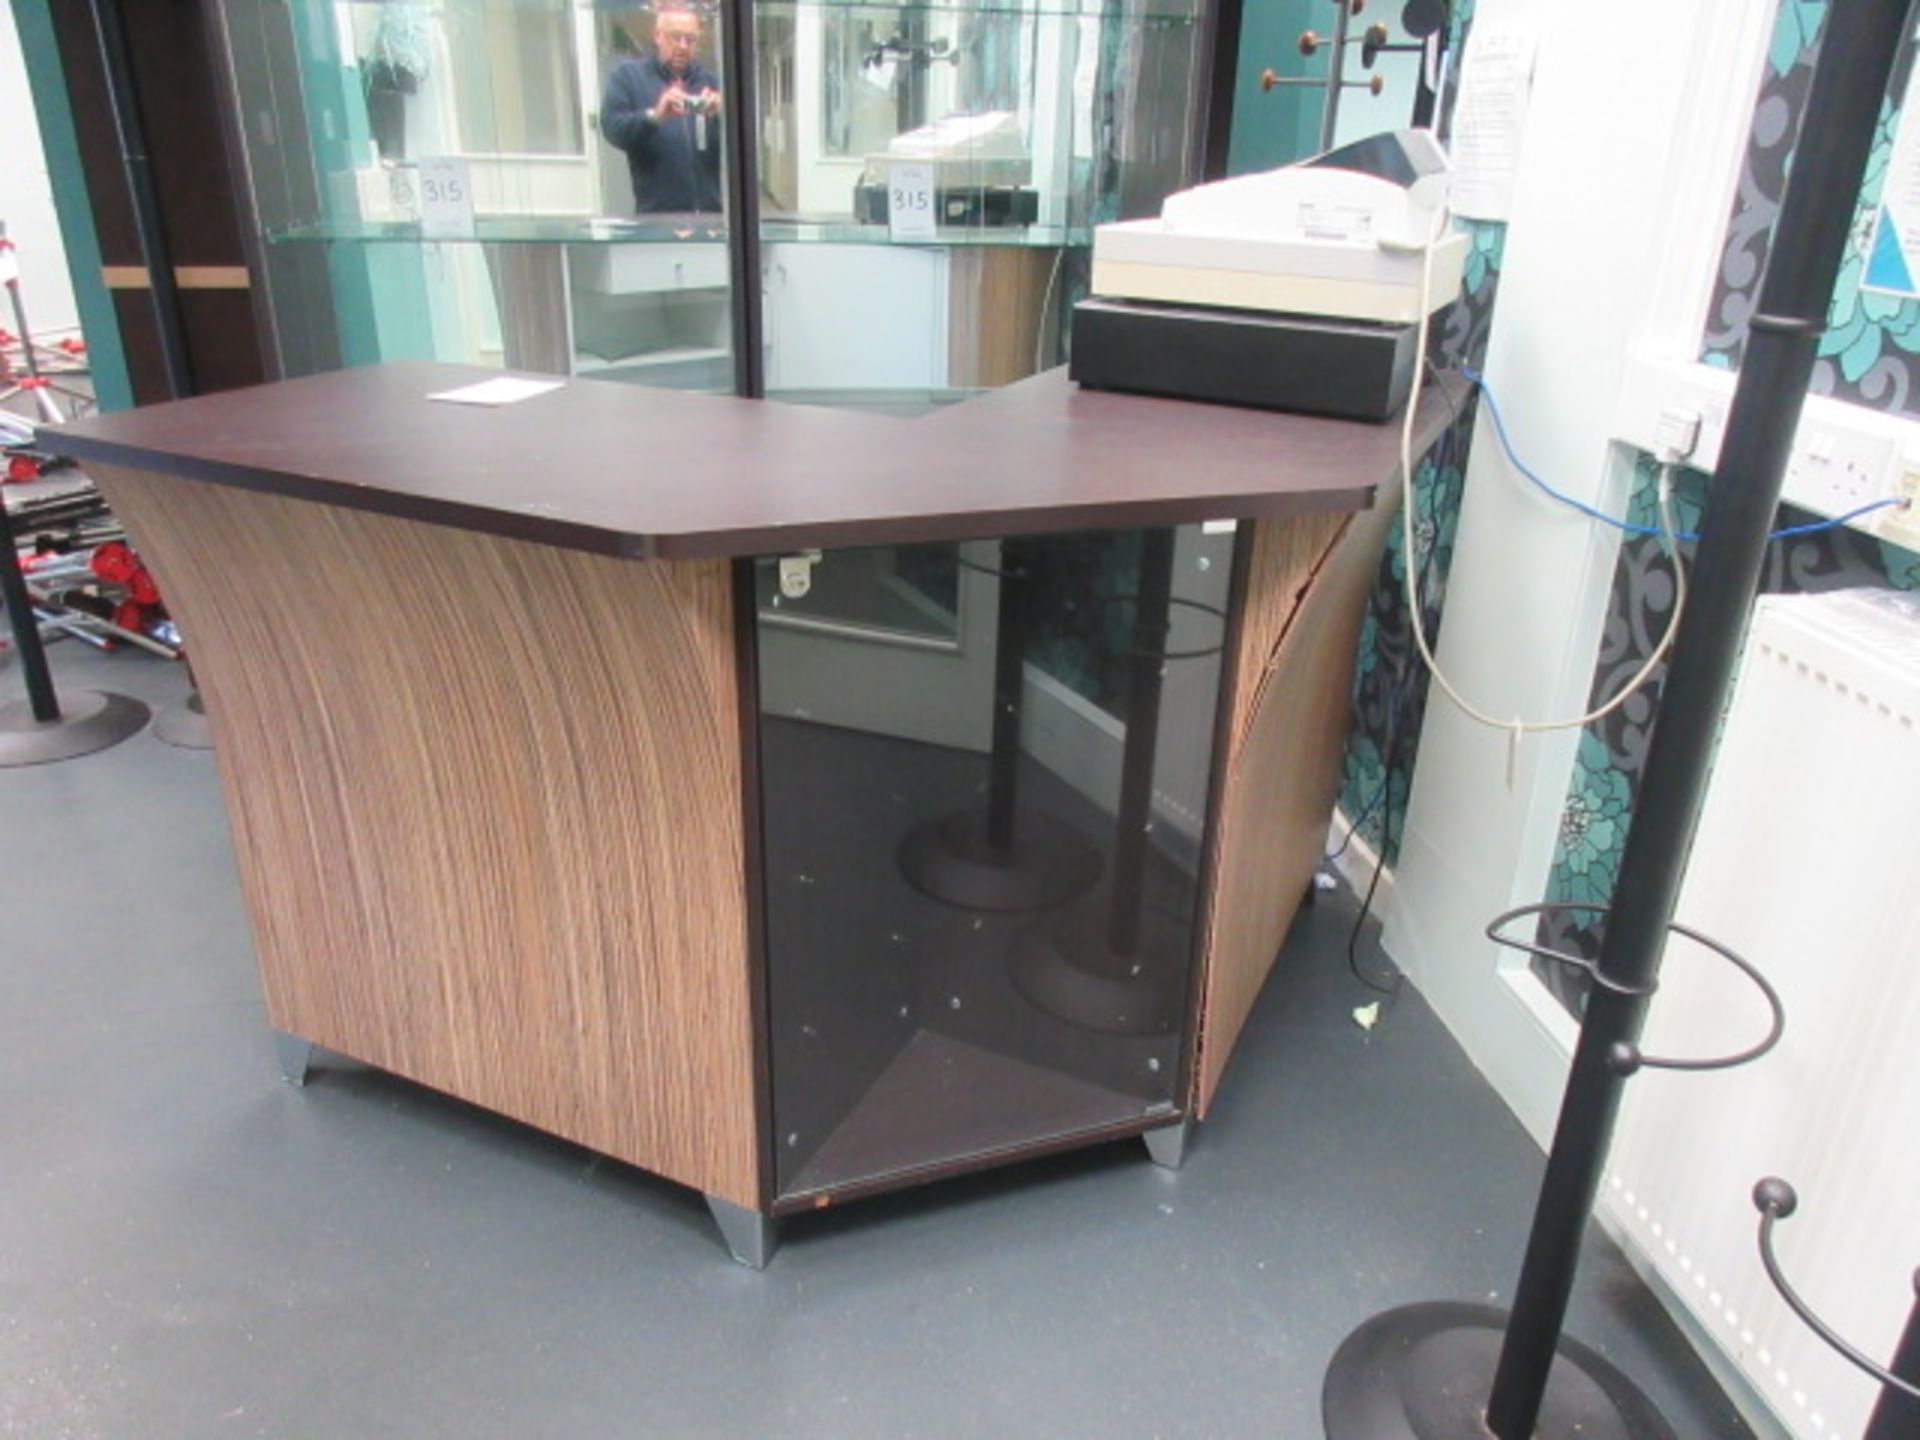 Hair Salon Reception Desk. Glass display shelves in front. Cupboard and draw in rear Holehouse road.